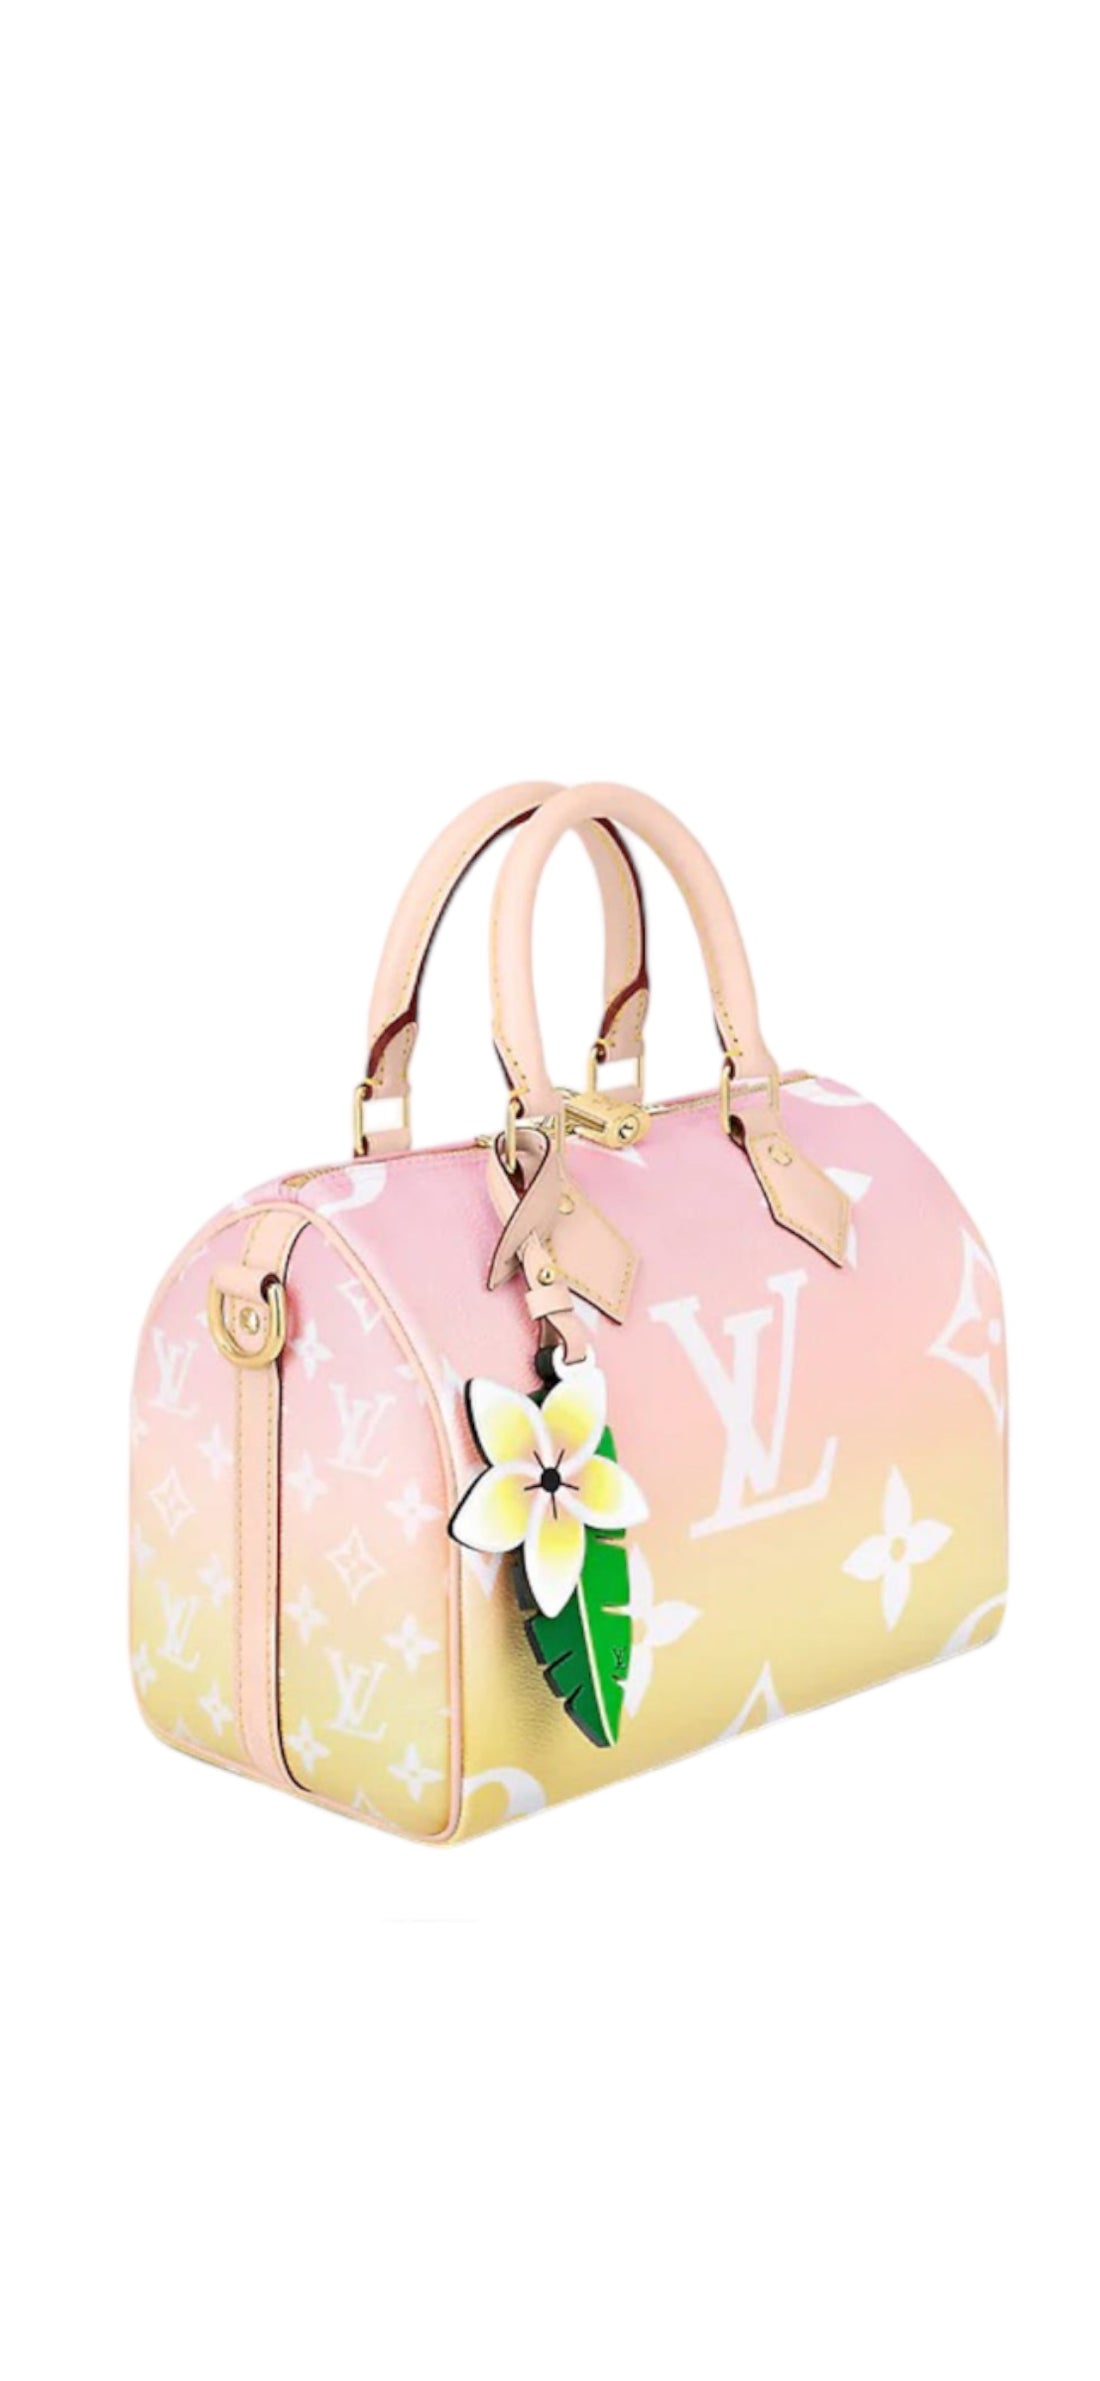 Louis Vuitton Speedy 25 Bandouliere Rose "by the pool"